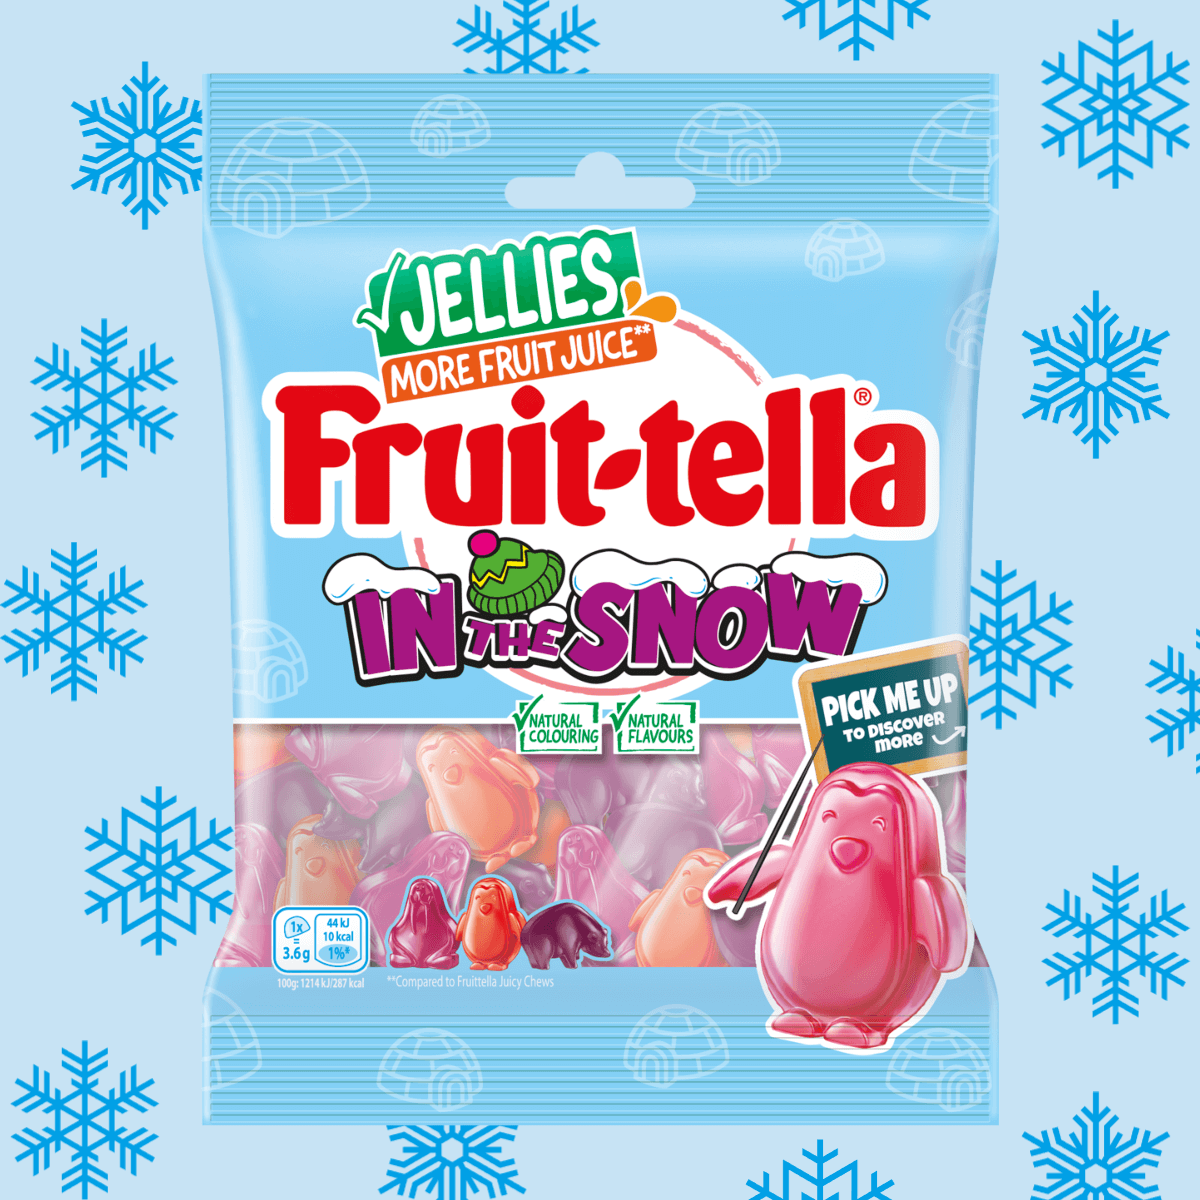 Bag of Fruit-tella In The Snow Jellies with light blue packaging and snowflake background graphics